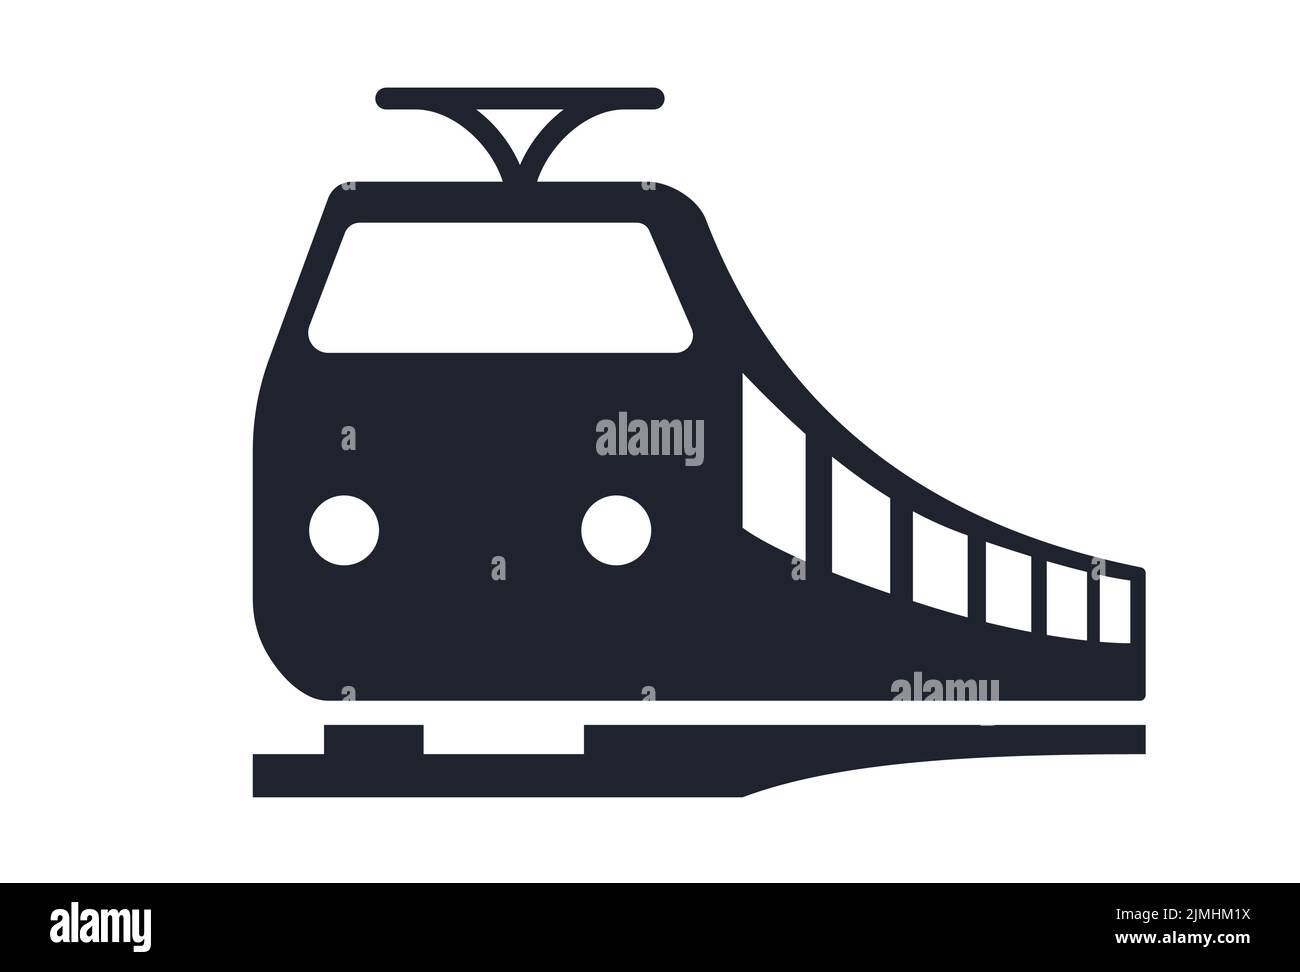 Train tram subway or railroad central station sign vector illustration icon Stock Vector